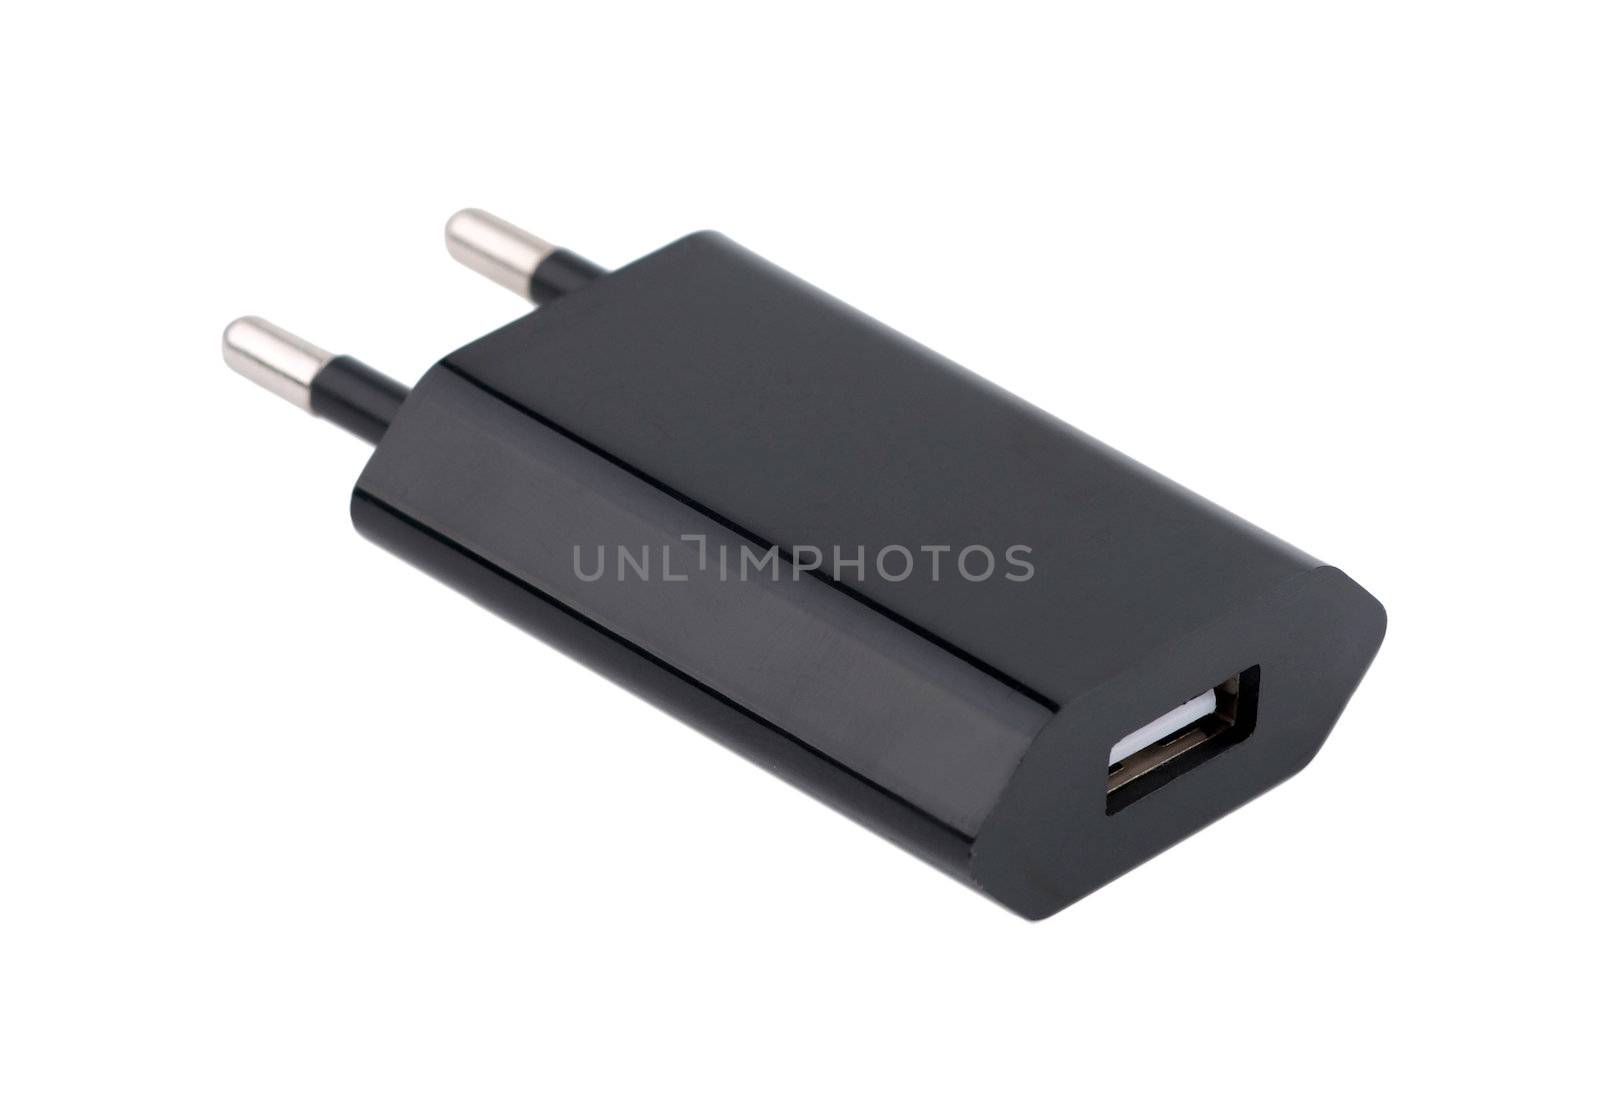 Black USB charger device isolated on white